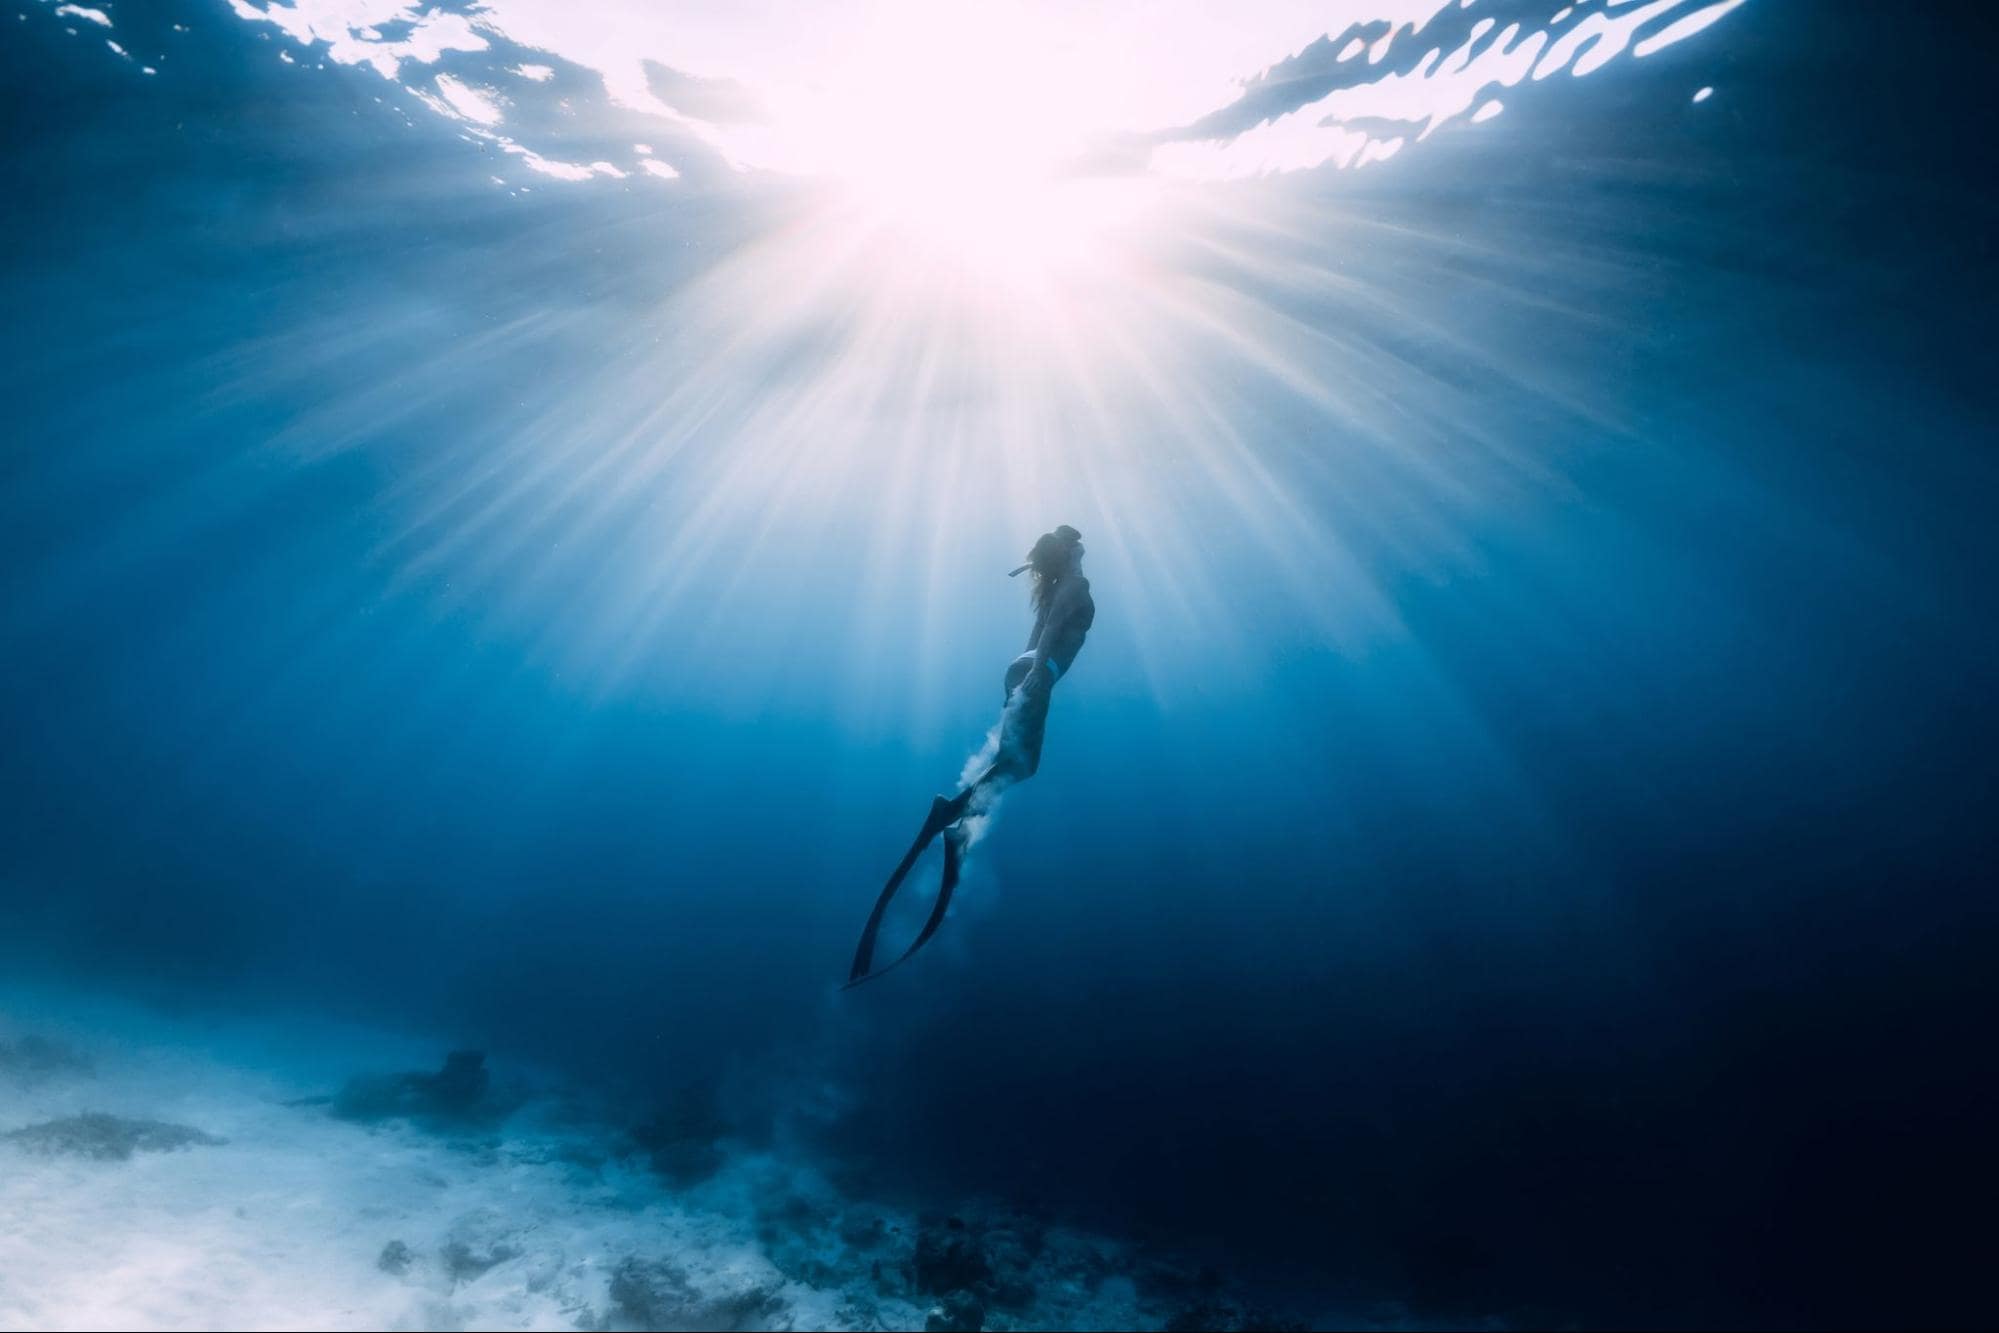 Scuba vs. Freediving: Which is Right for You?